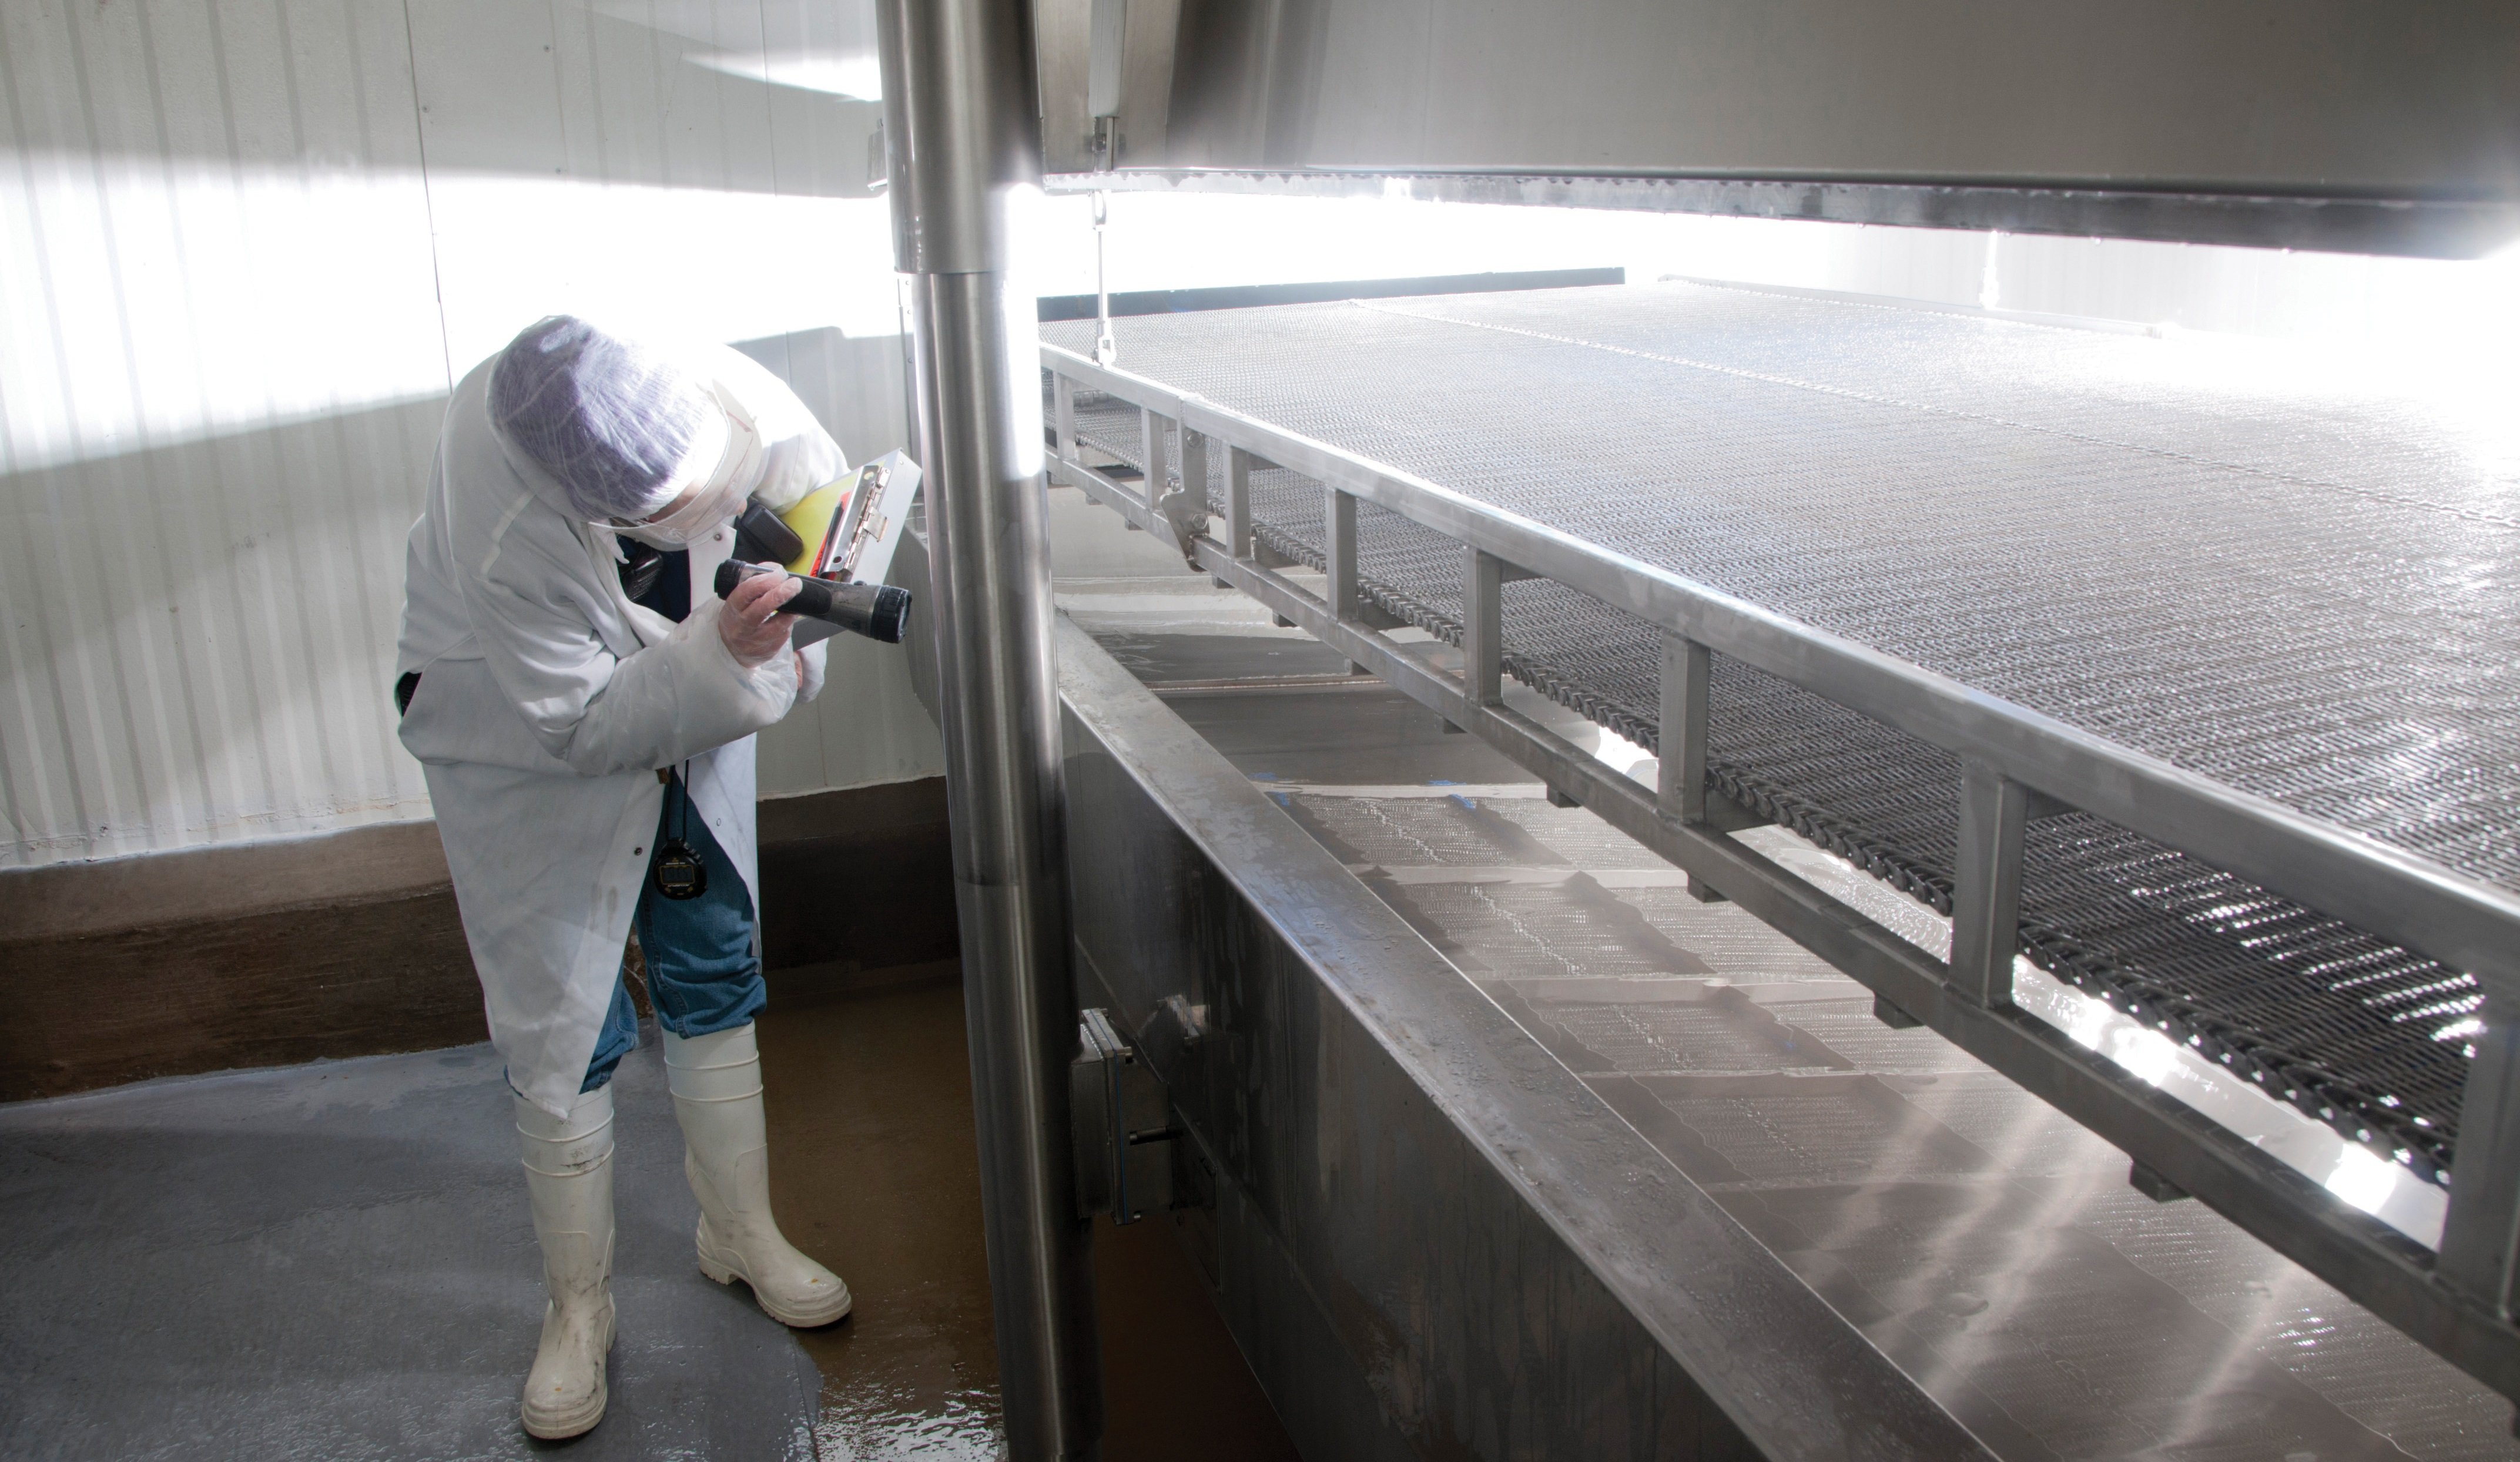 Maintaining Food Quality and Safety In a Rapidly Changing Environment